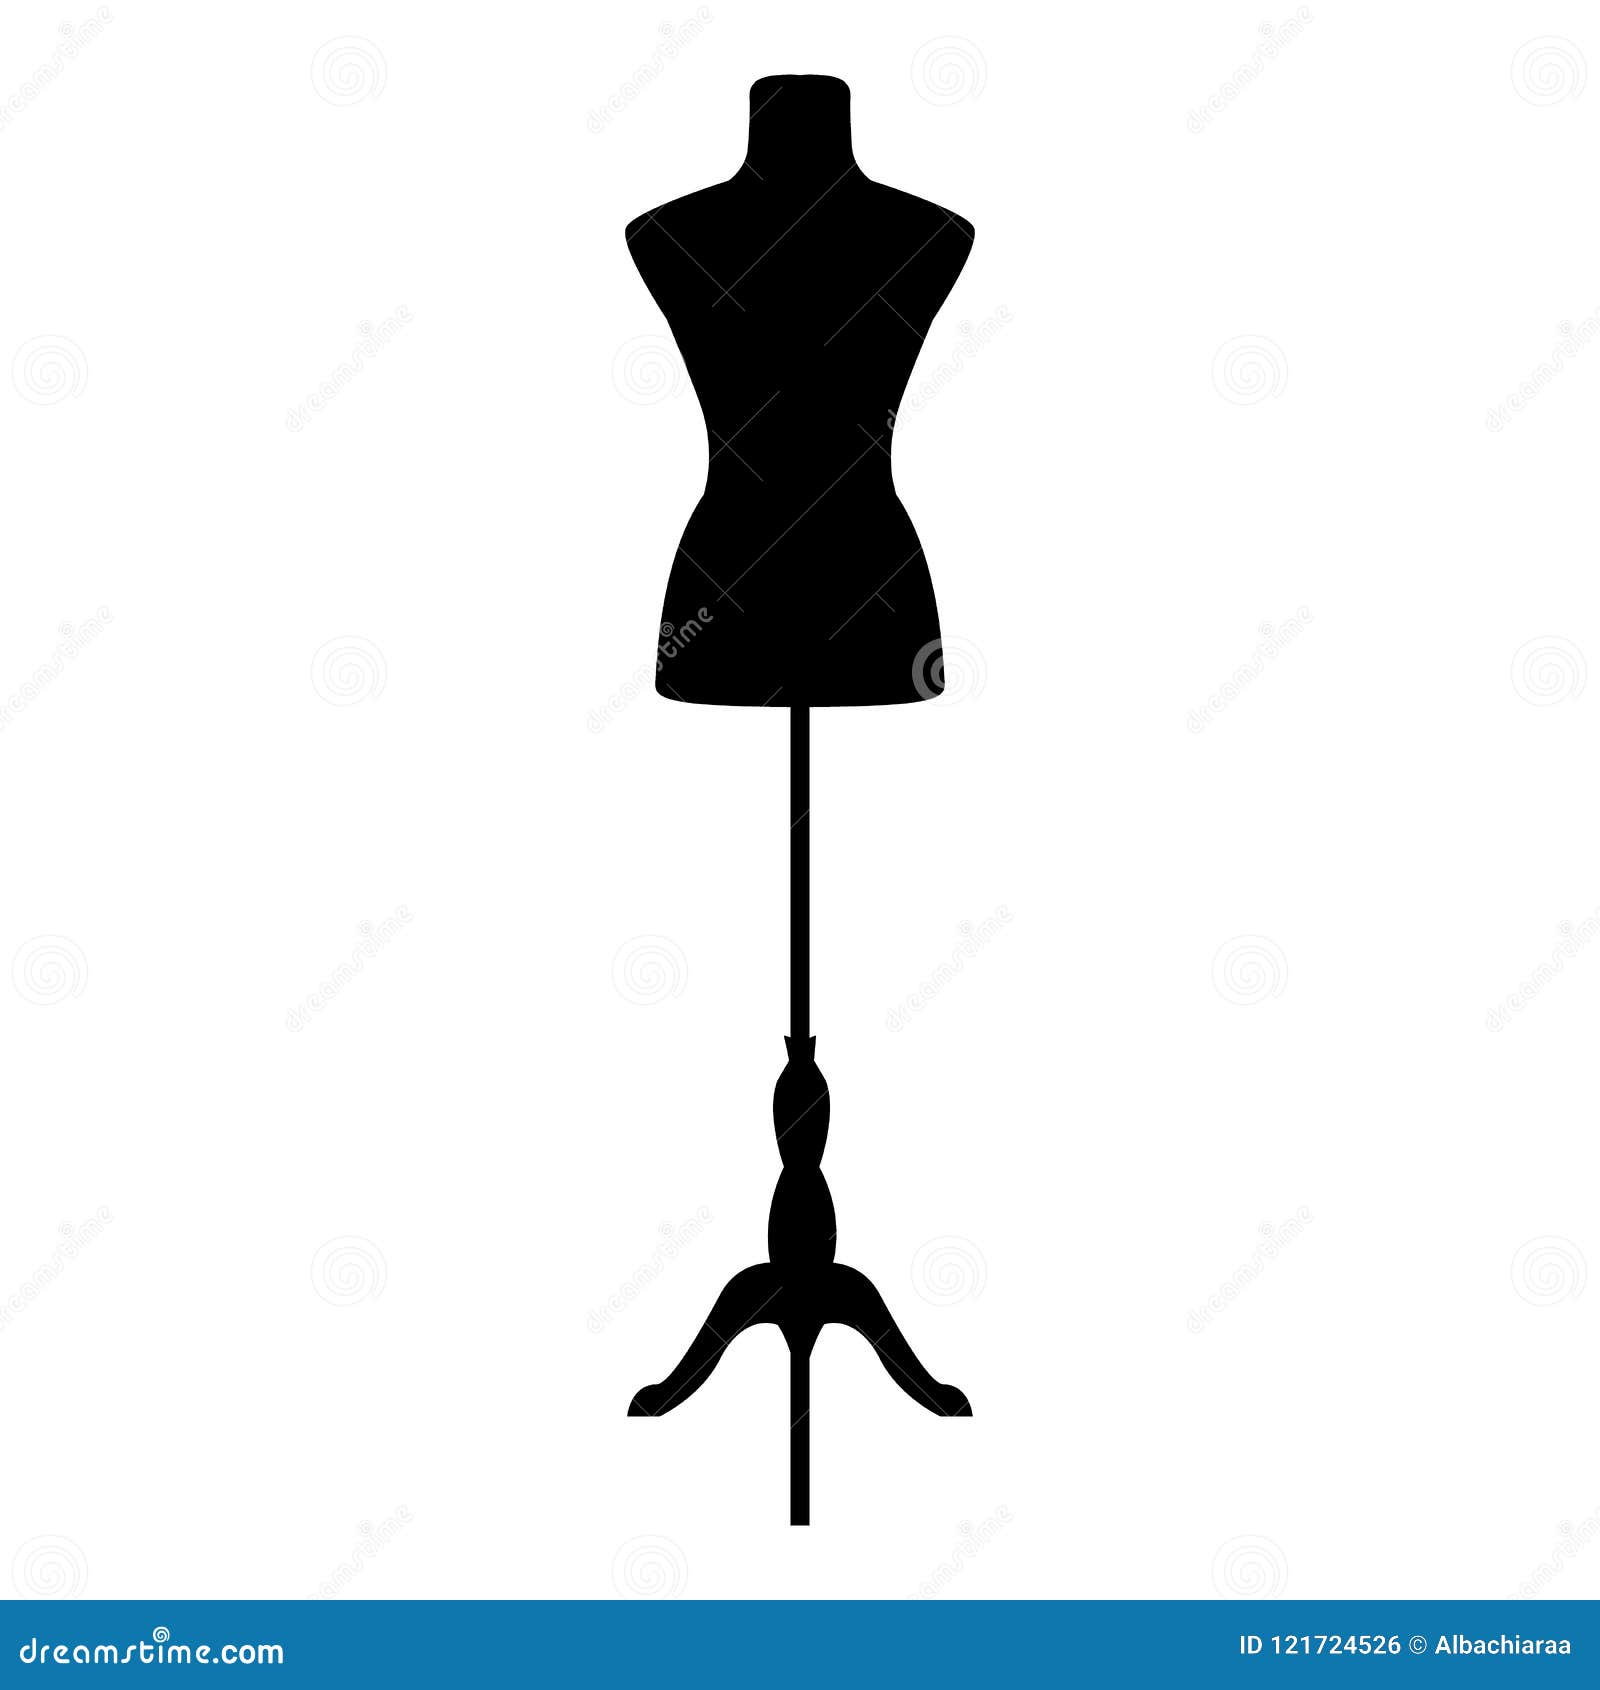 Mannequin dressmaker icon flat isolated Royalty Free Vector